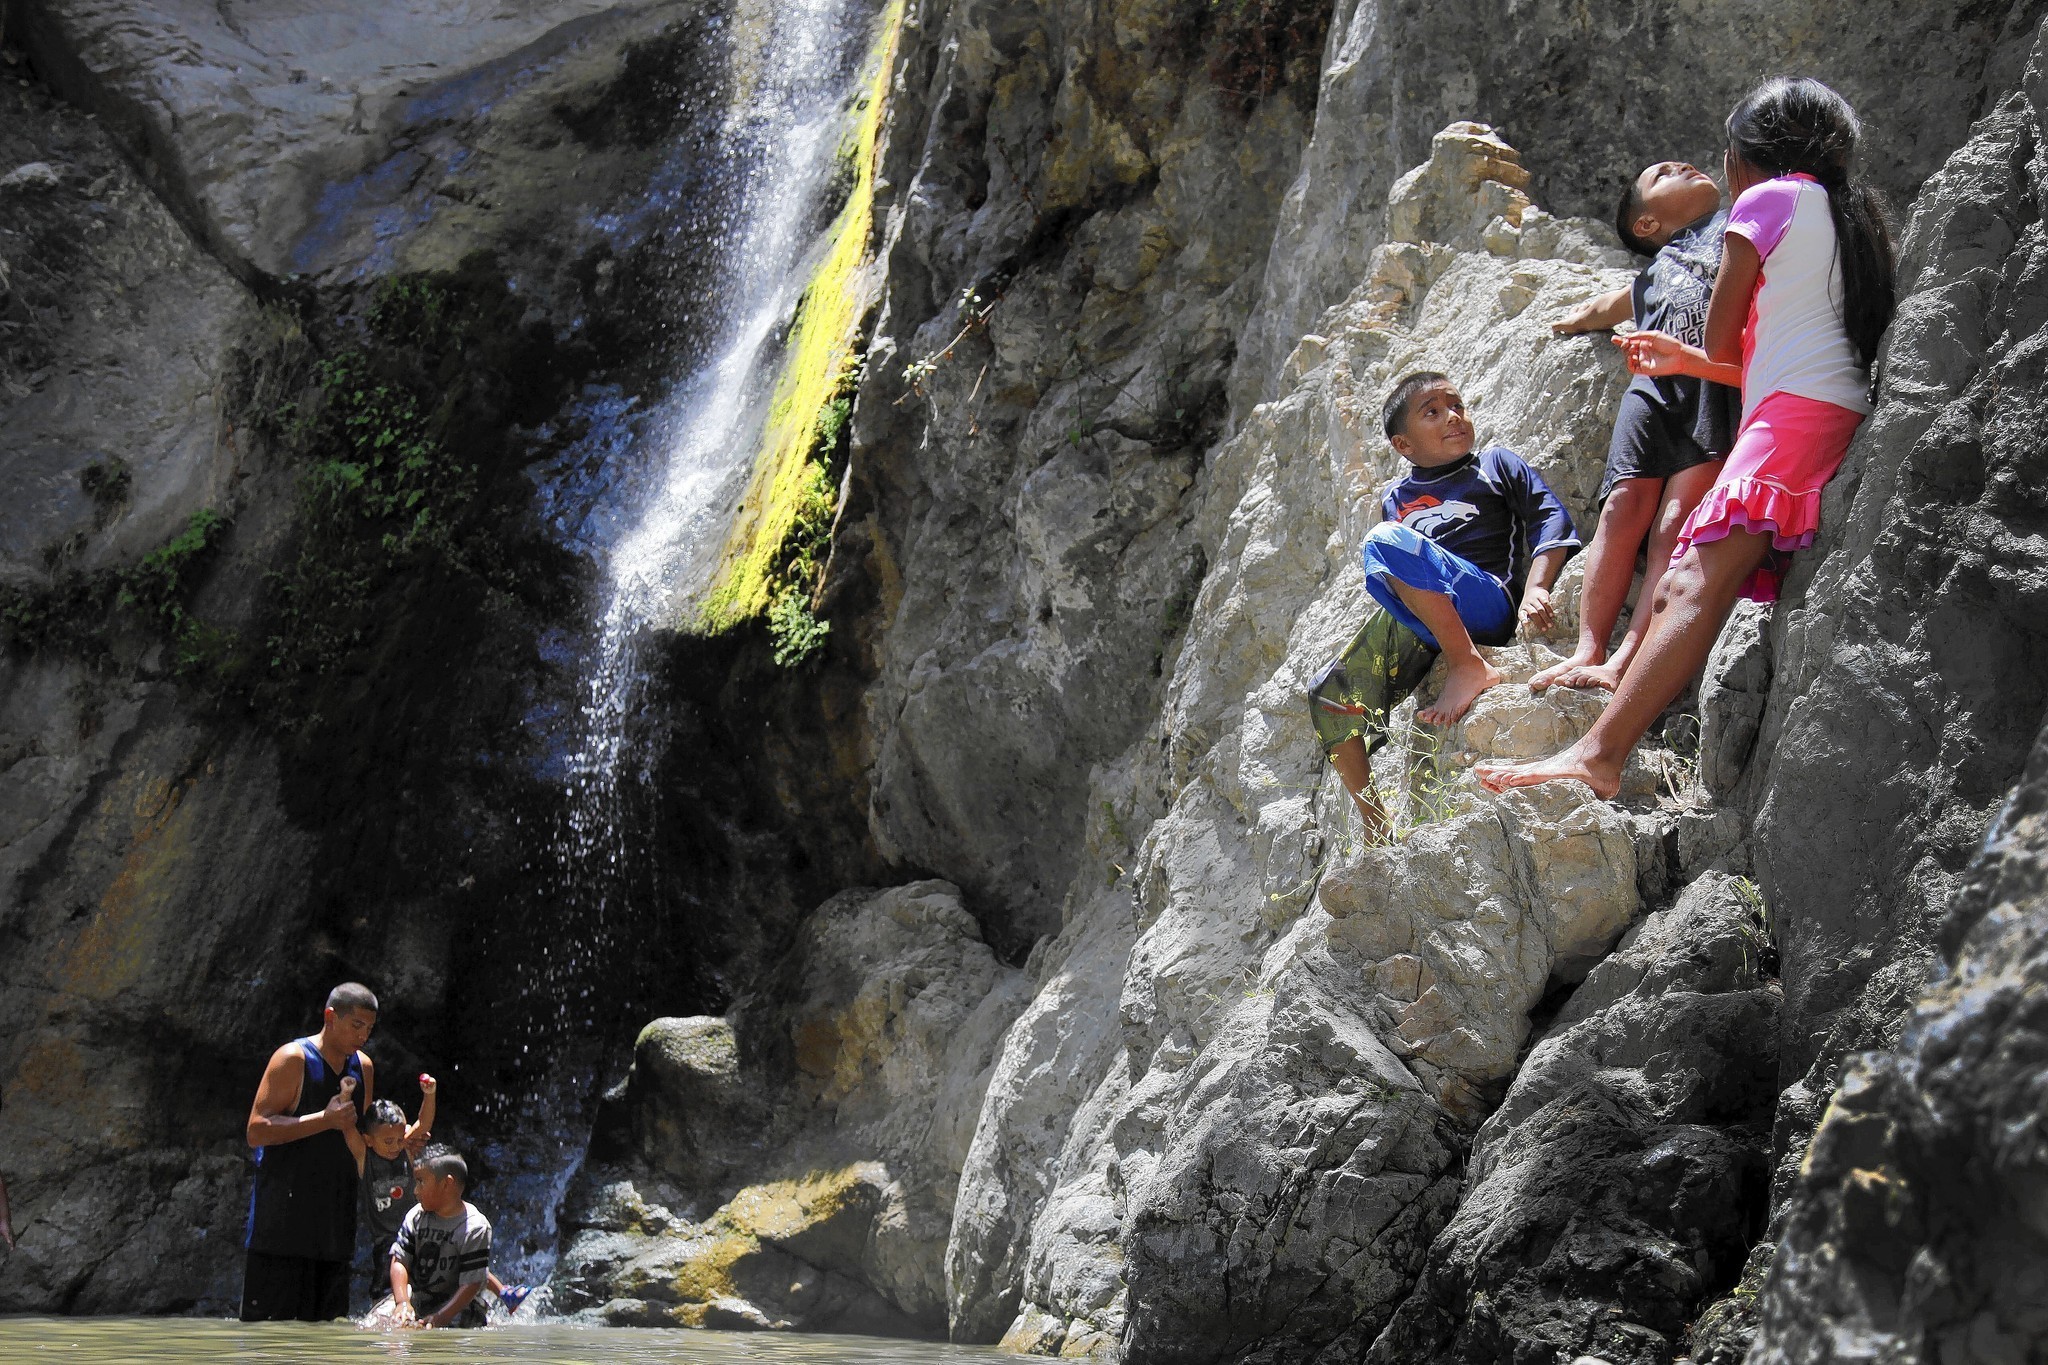 Injured hiker rescued in Eaton Canyon after tumbling down a waterfall - Los Angeles Times